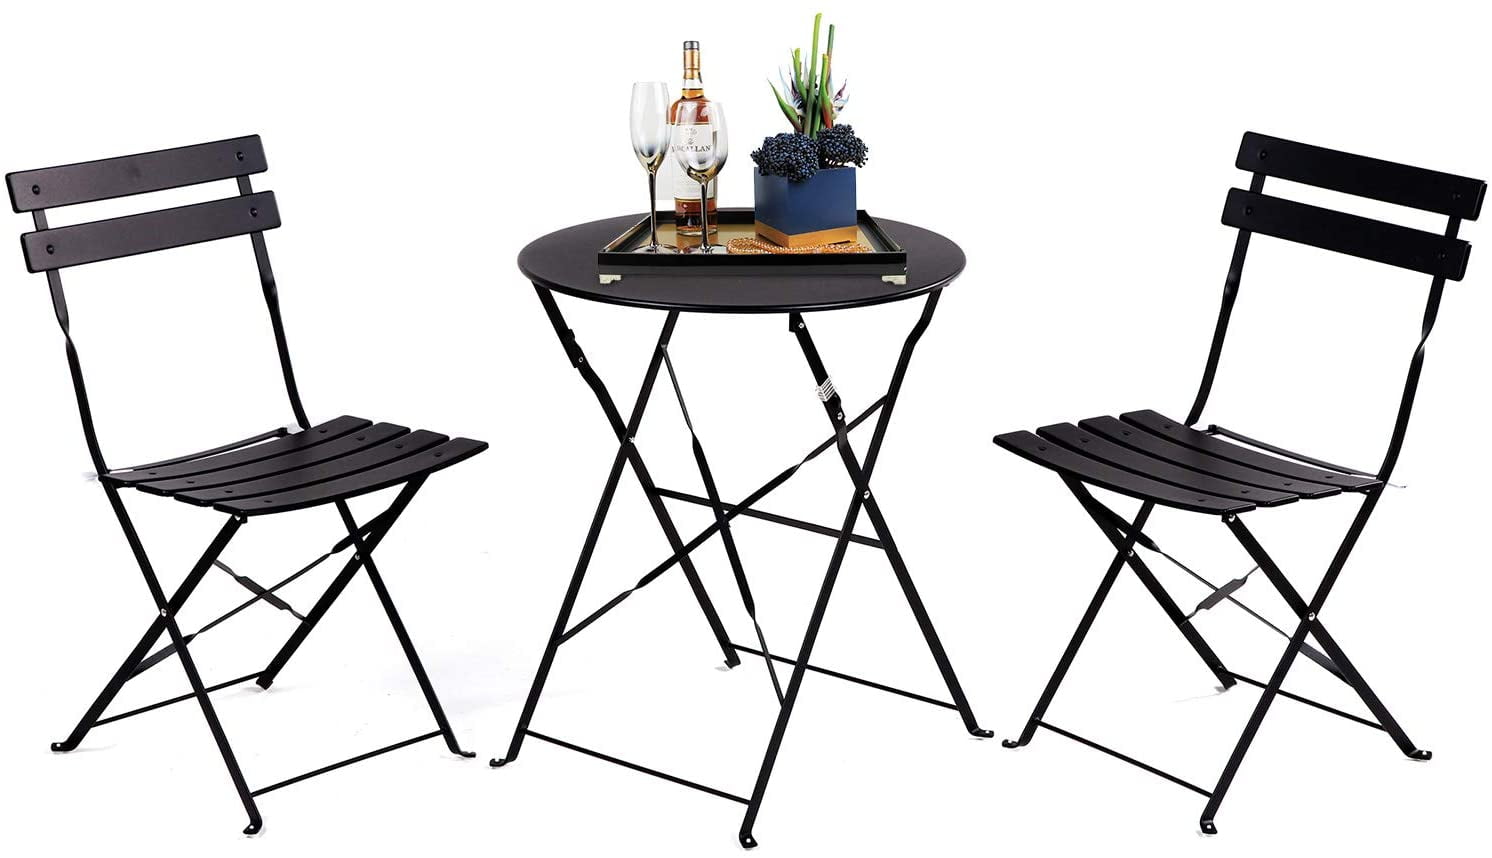 Grand patio 3pc Metal Folding Bistro Set 2 Chairs and 1 Table Garden Peacock Blue Weather-Resistant Outdoor/Indoor Conversation Set for Patio Yard 